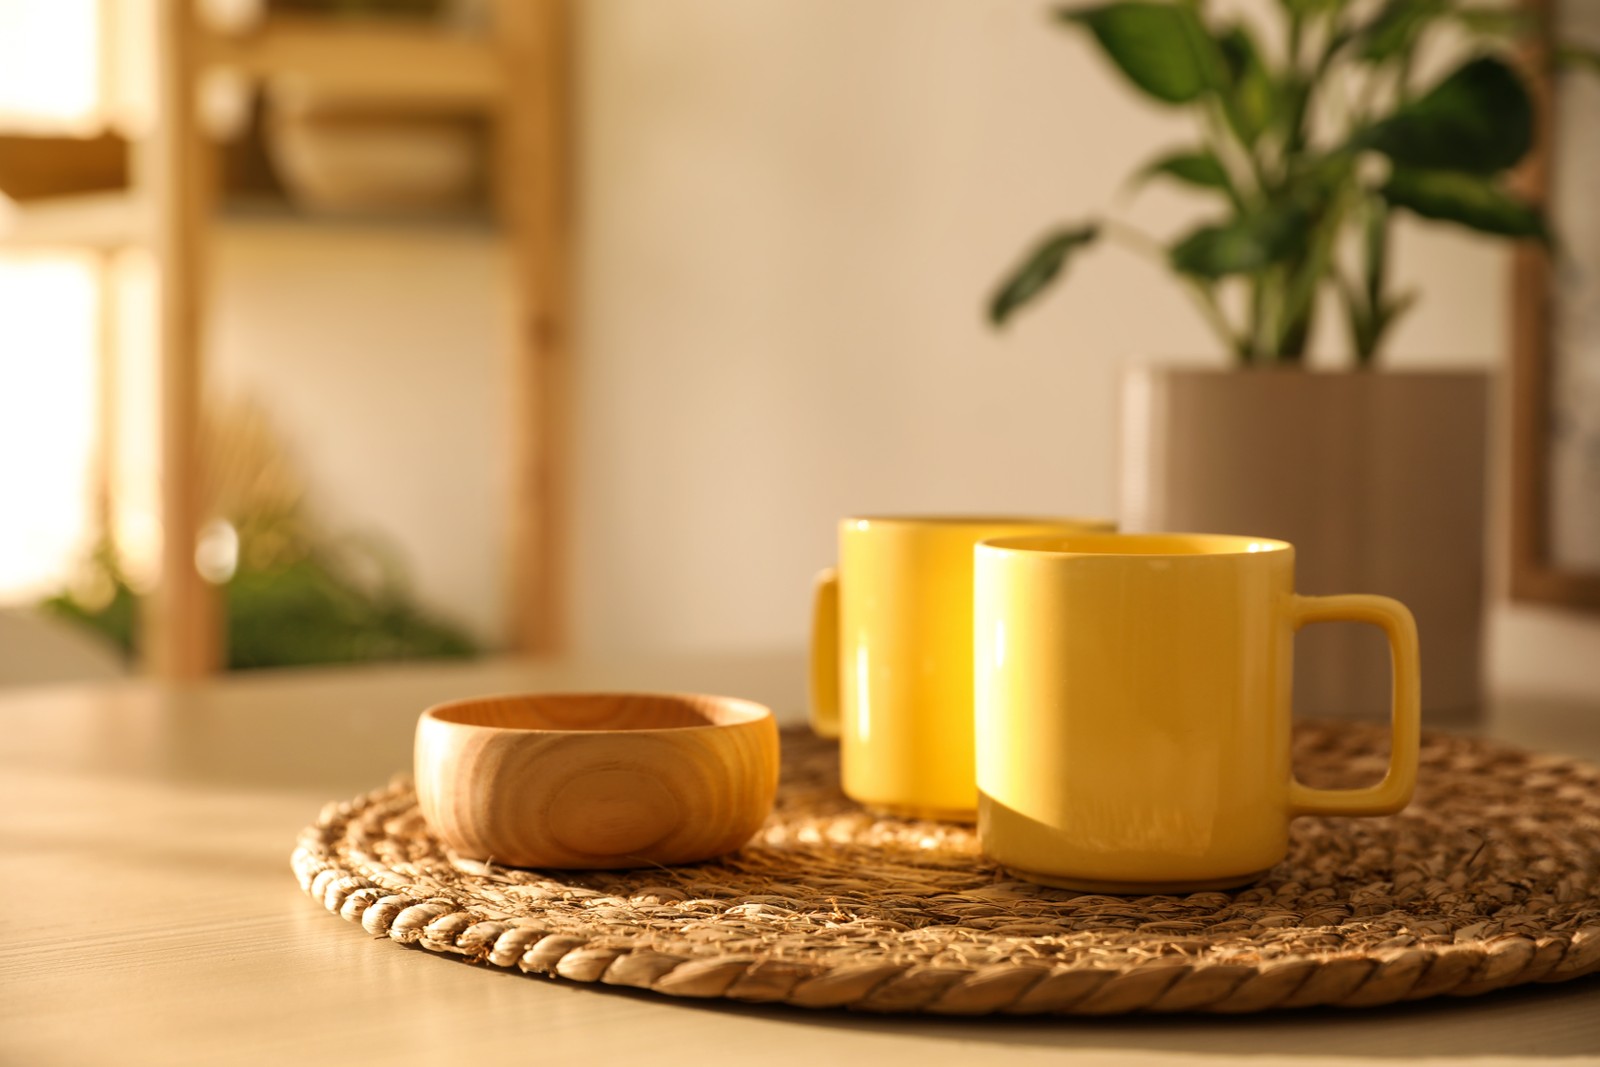 Photo of yellow cups and wooden bowl on wicker mat in kitchen